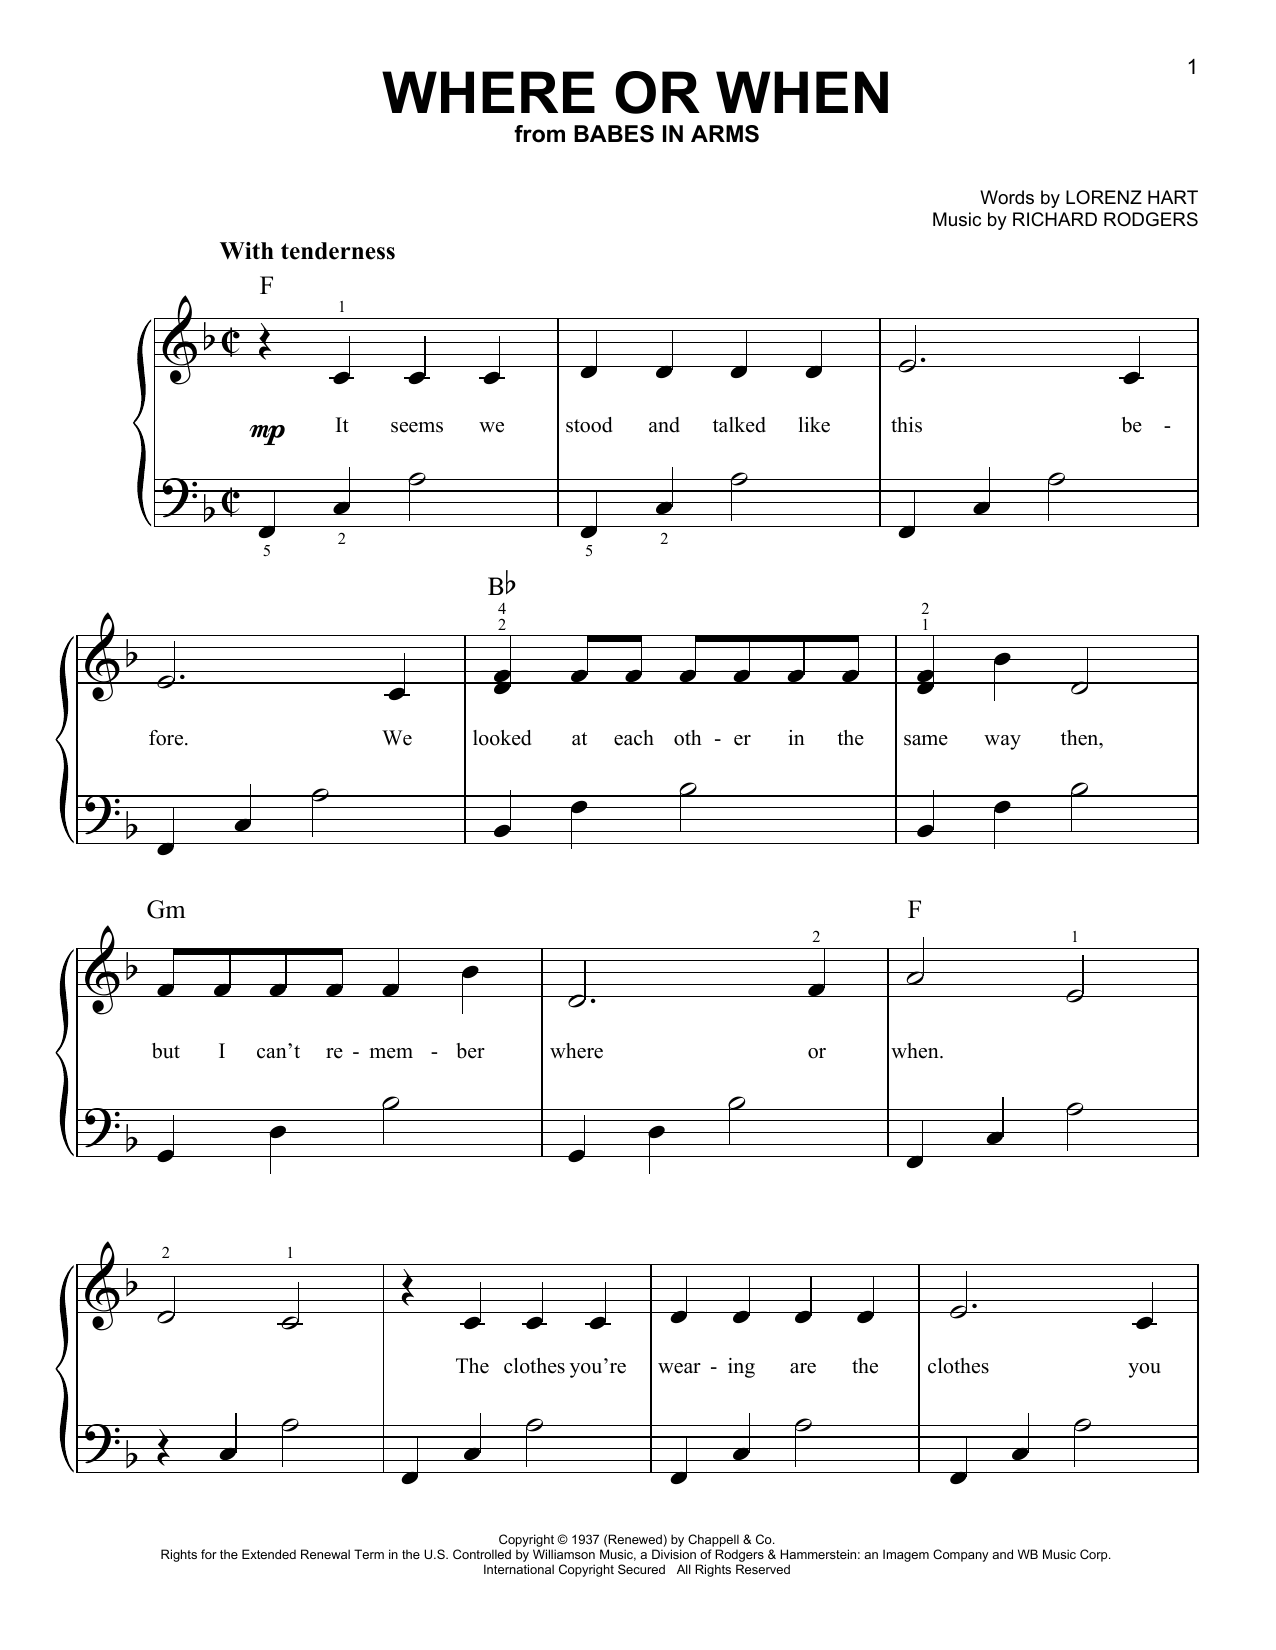 Download Rodgers & Hart Where Or When Sheet Music